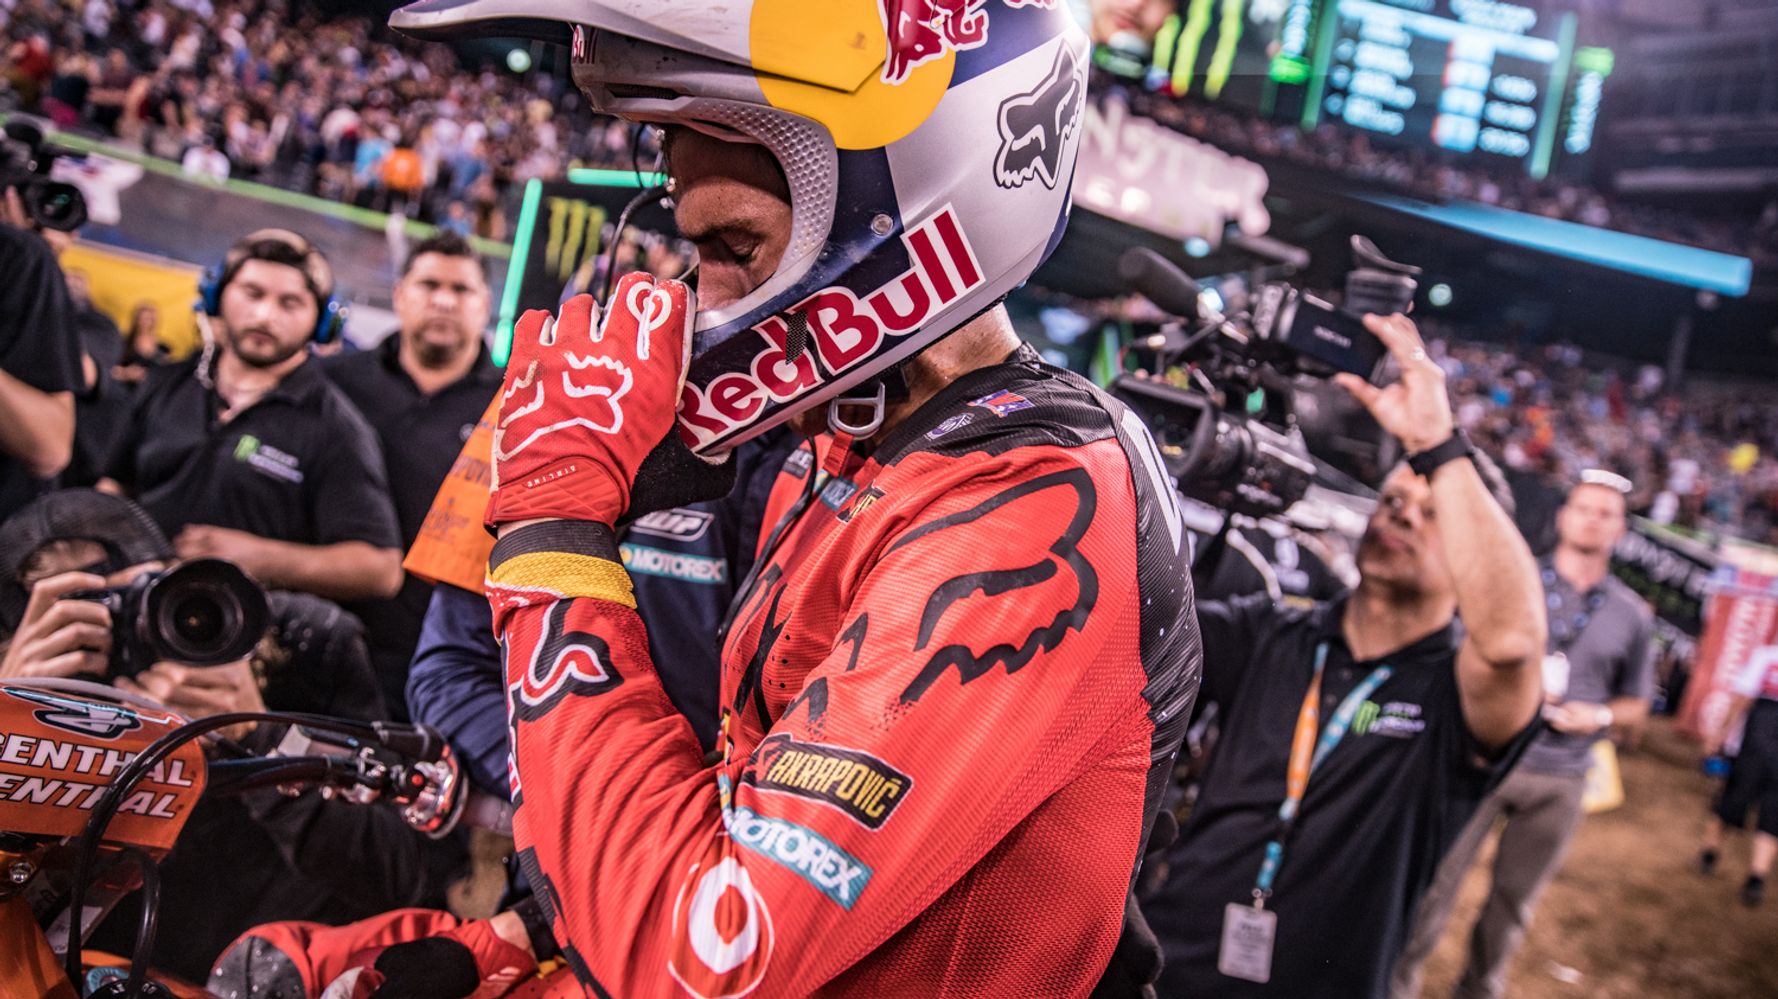 In Photos New Jersey Supercross HuffPost Contributor